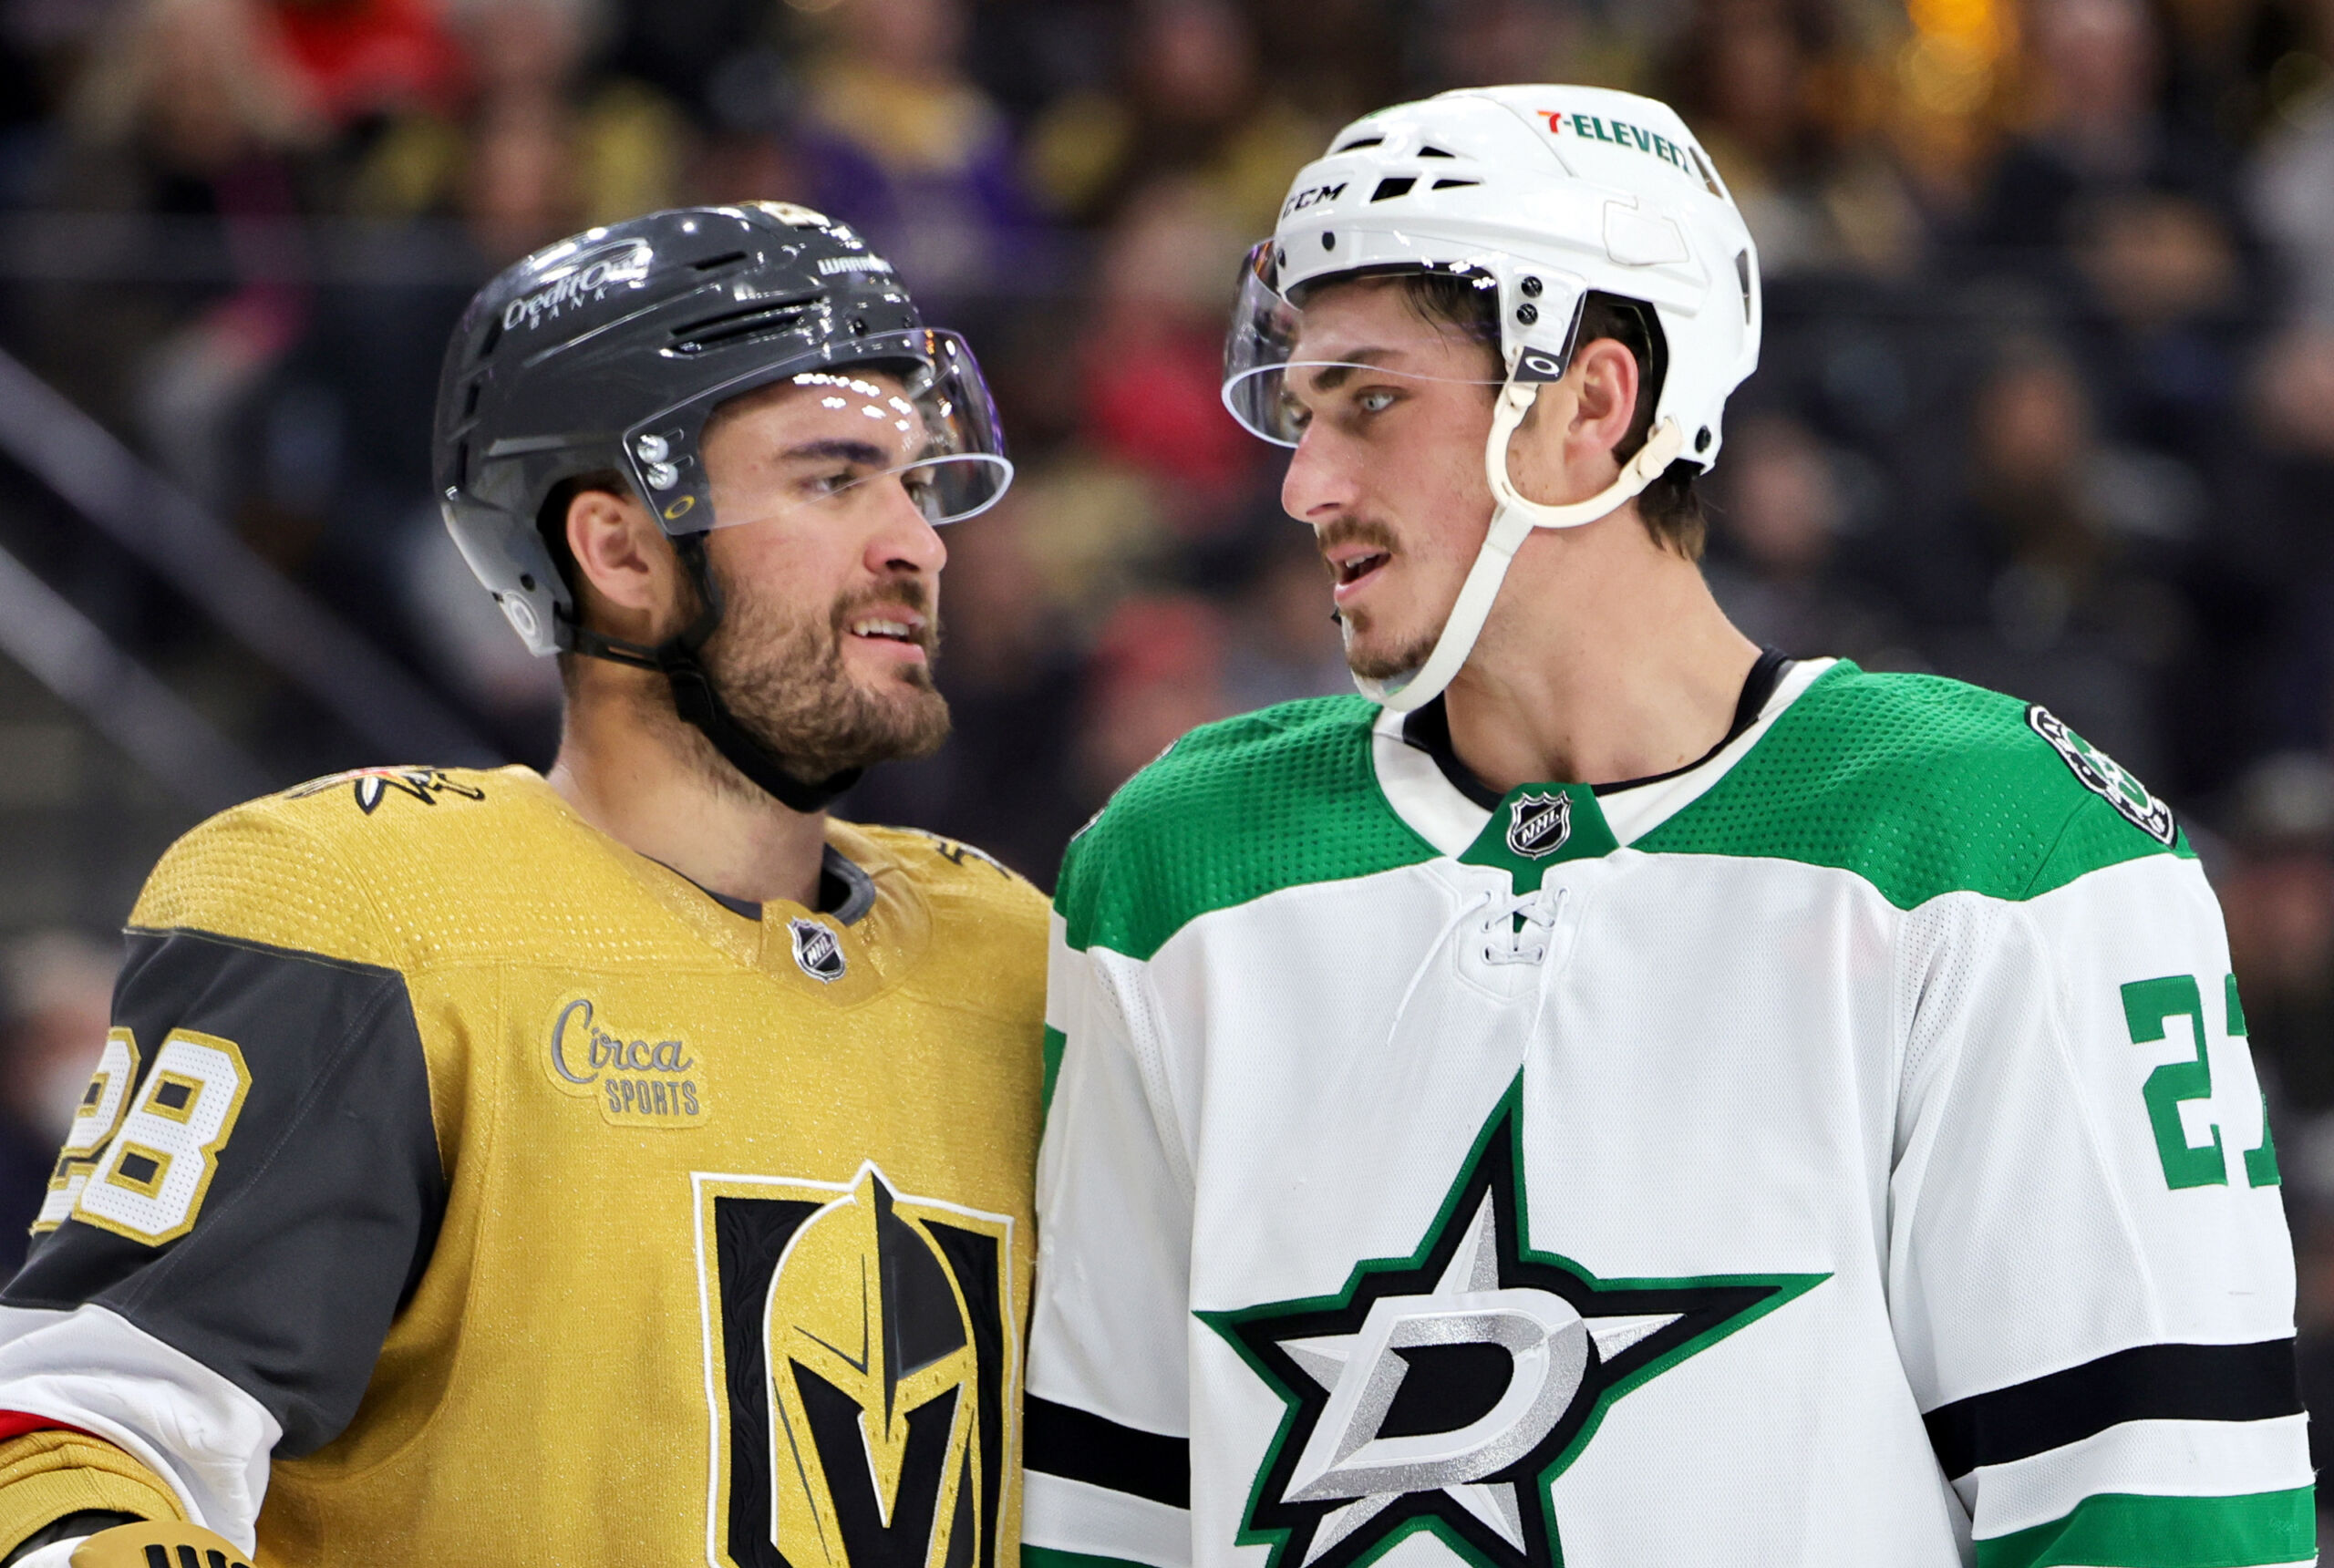 NHL scores, live updates: Golden Knights beat Stars in Game 6 to